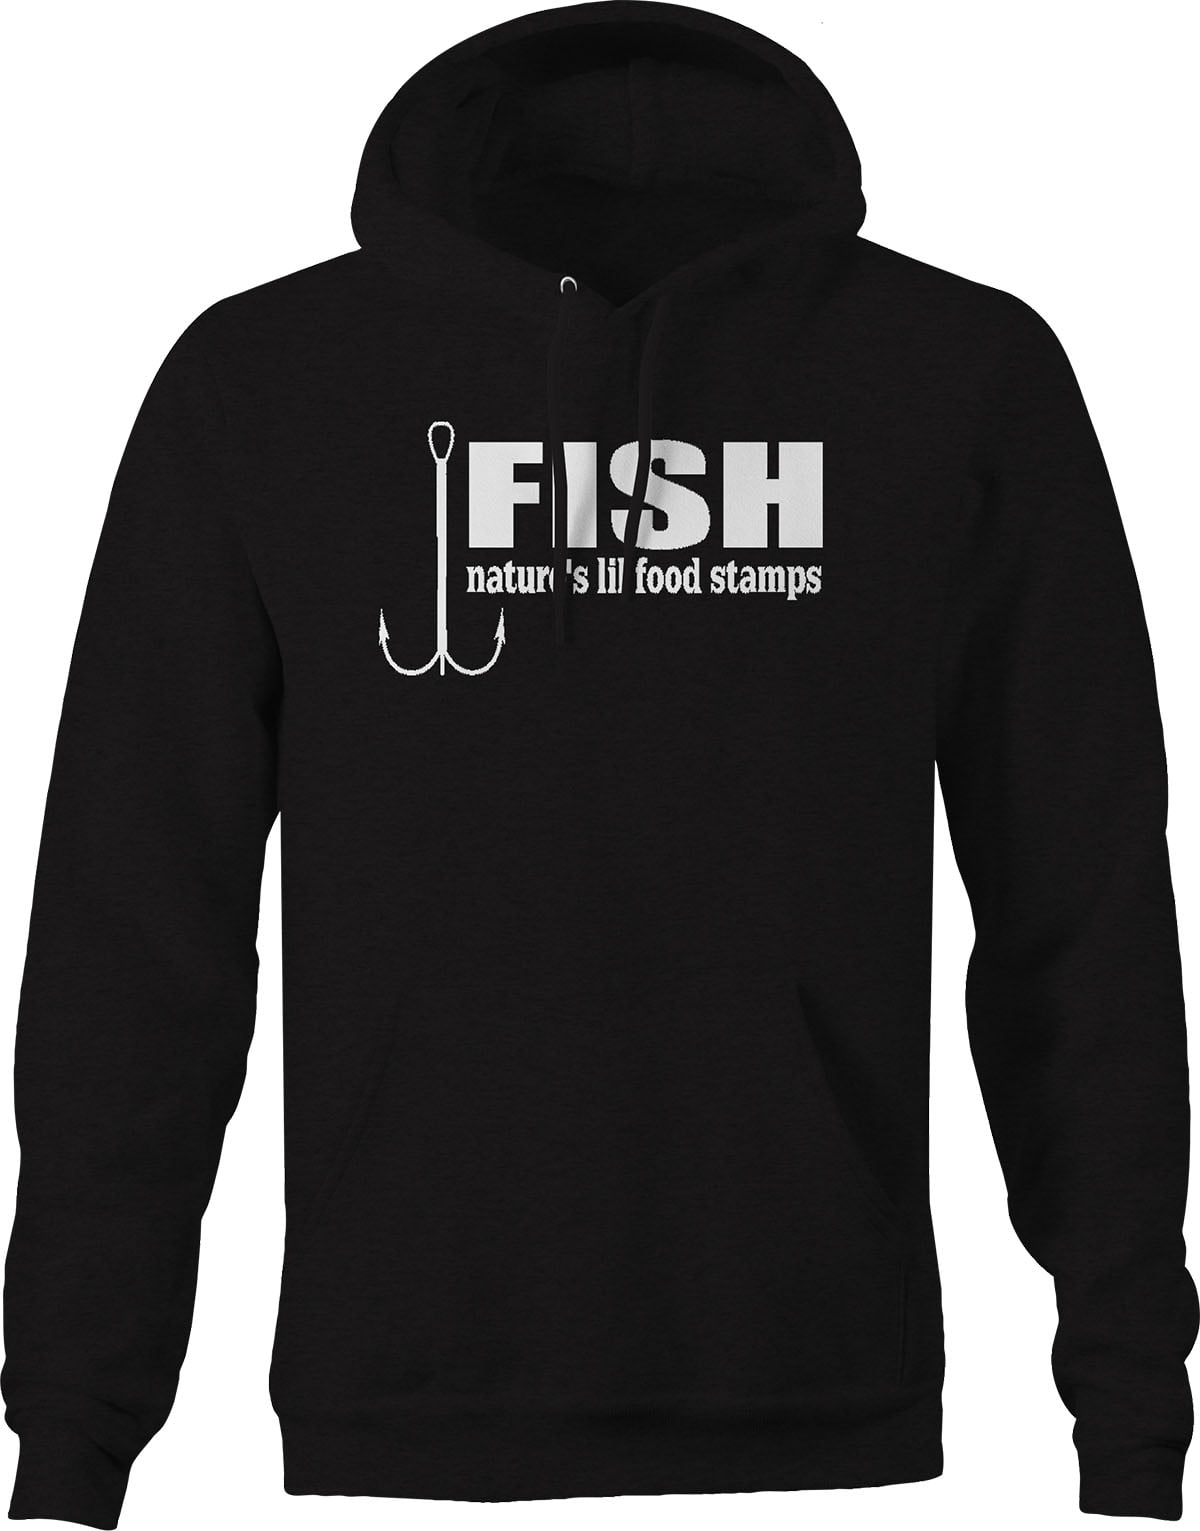 Fish Natures Lil Food Stamps Government Funny Hoodies for Men